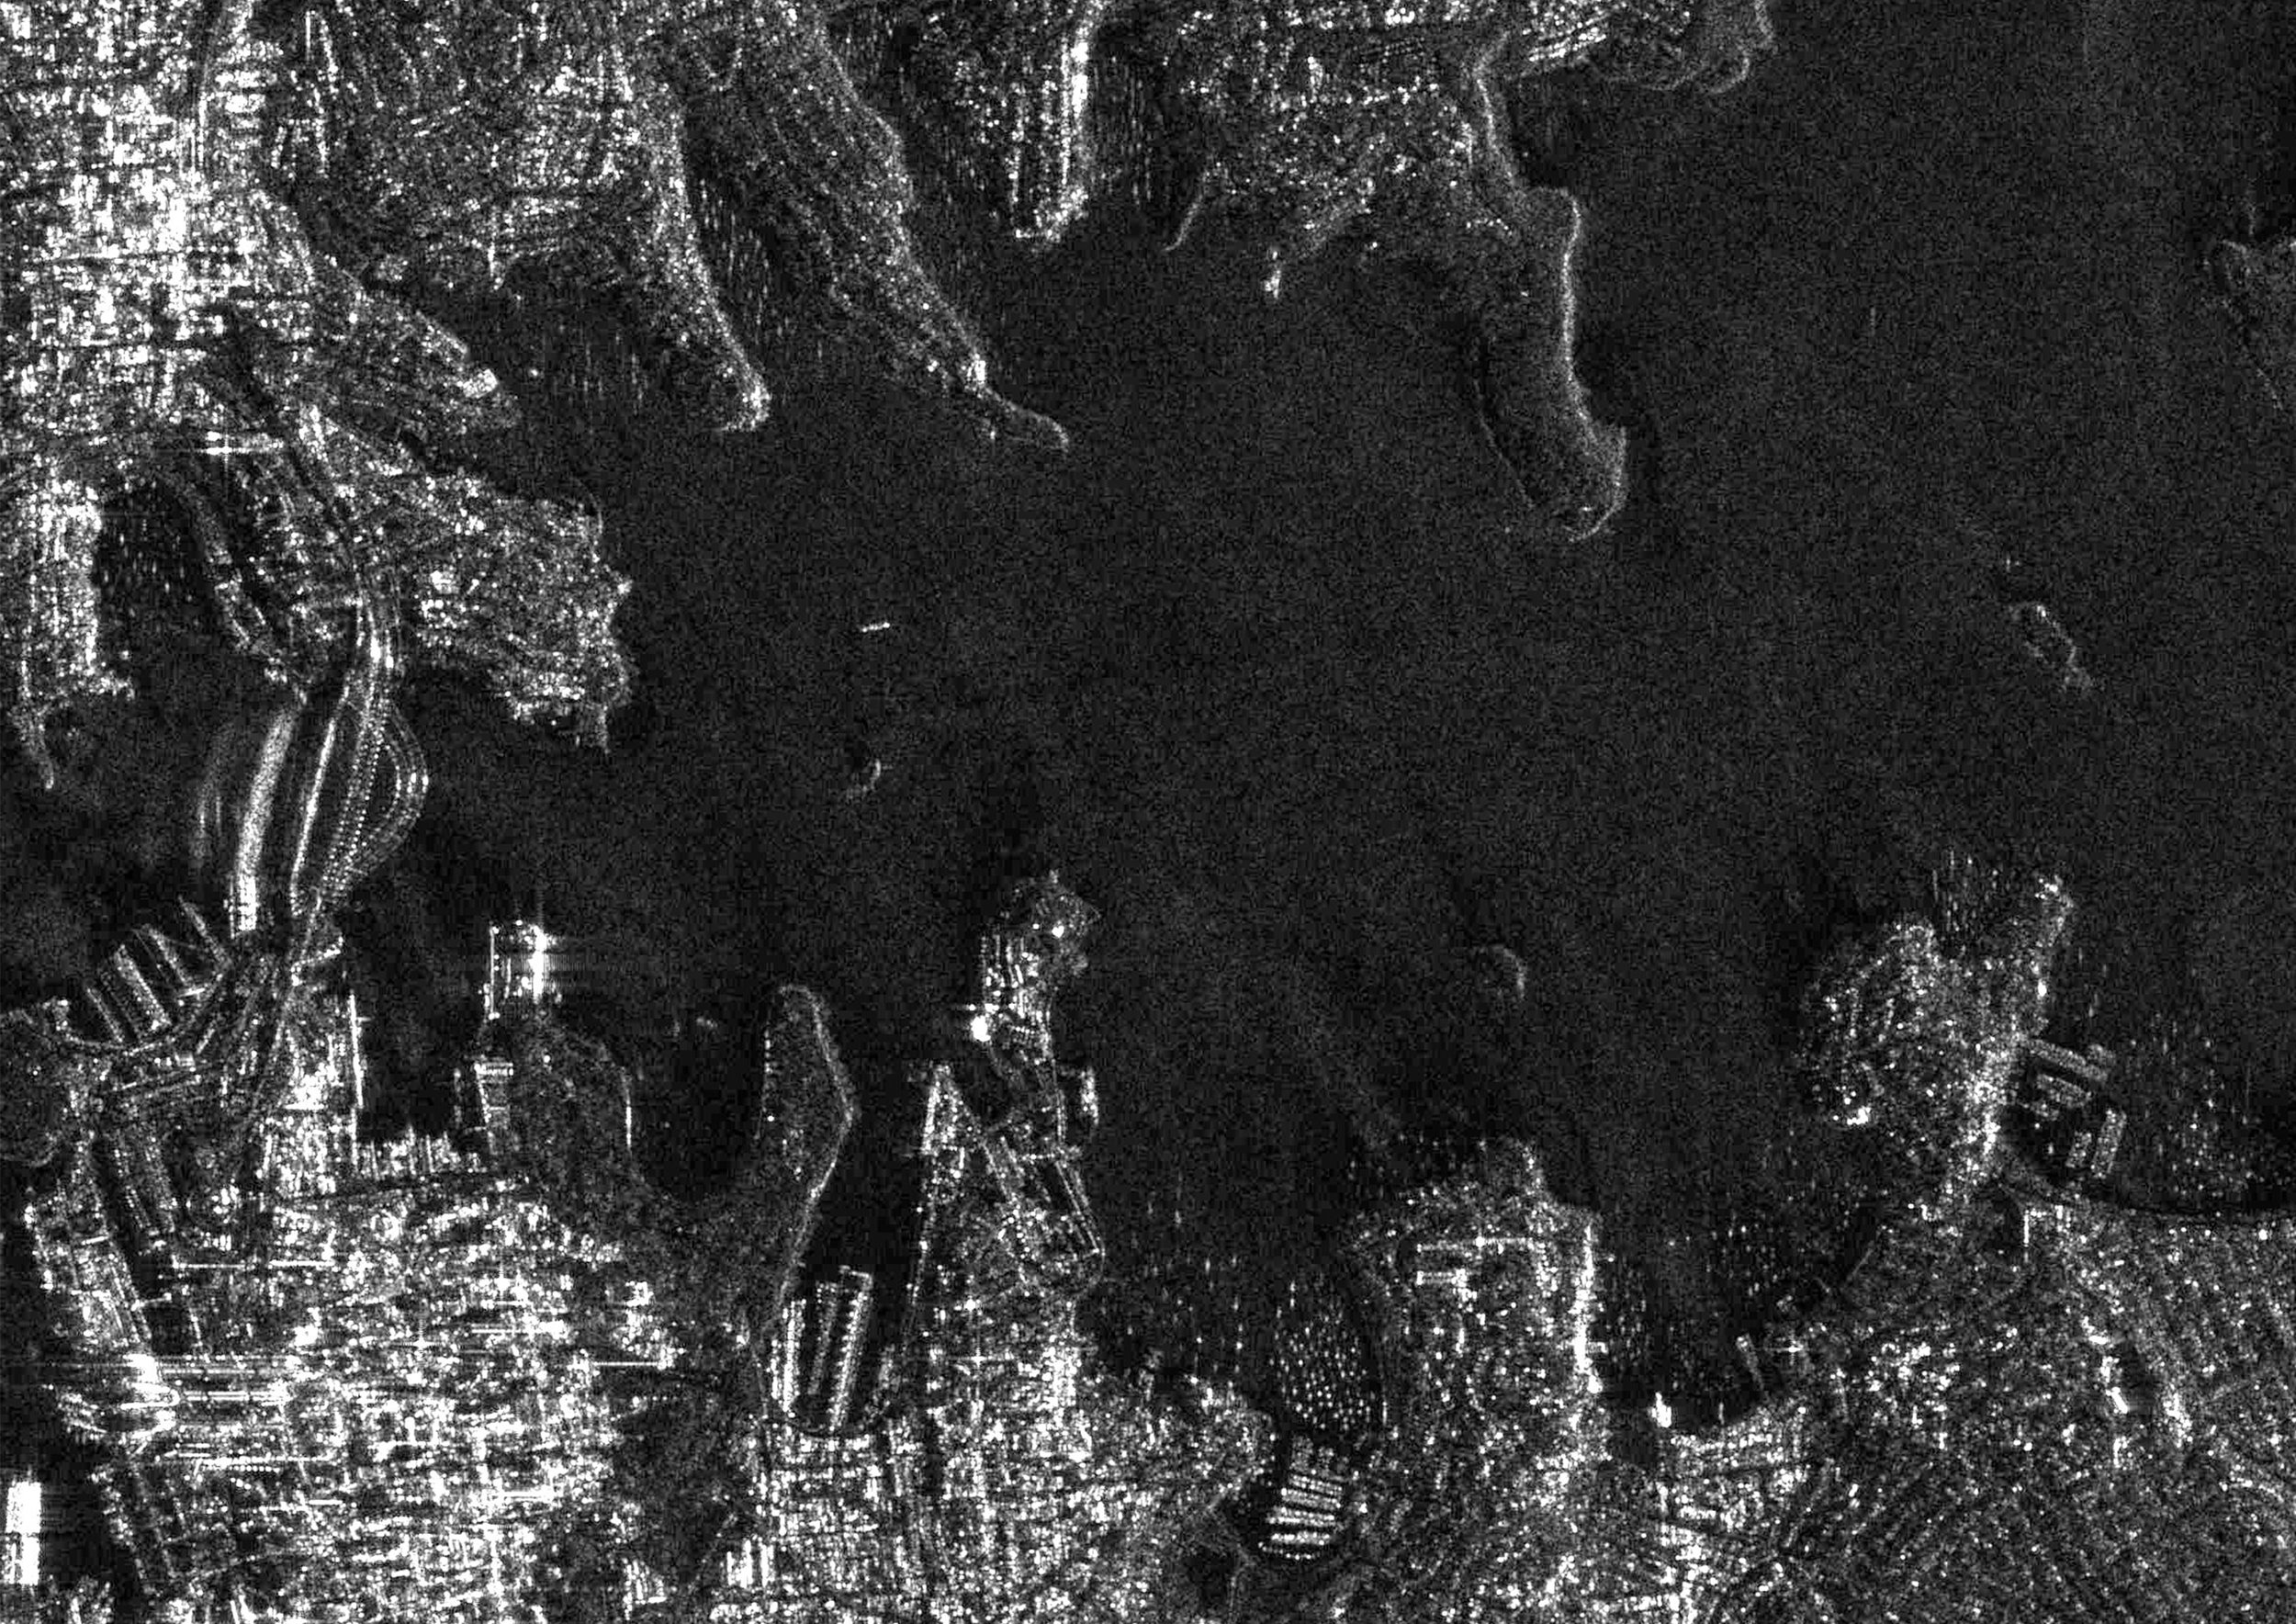 SSTL releases first images from S-Band Synthetic Aperture Radar satellite, NovaSAR-1